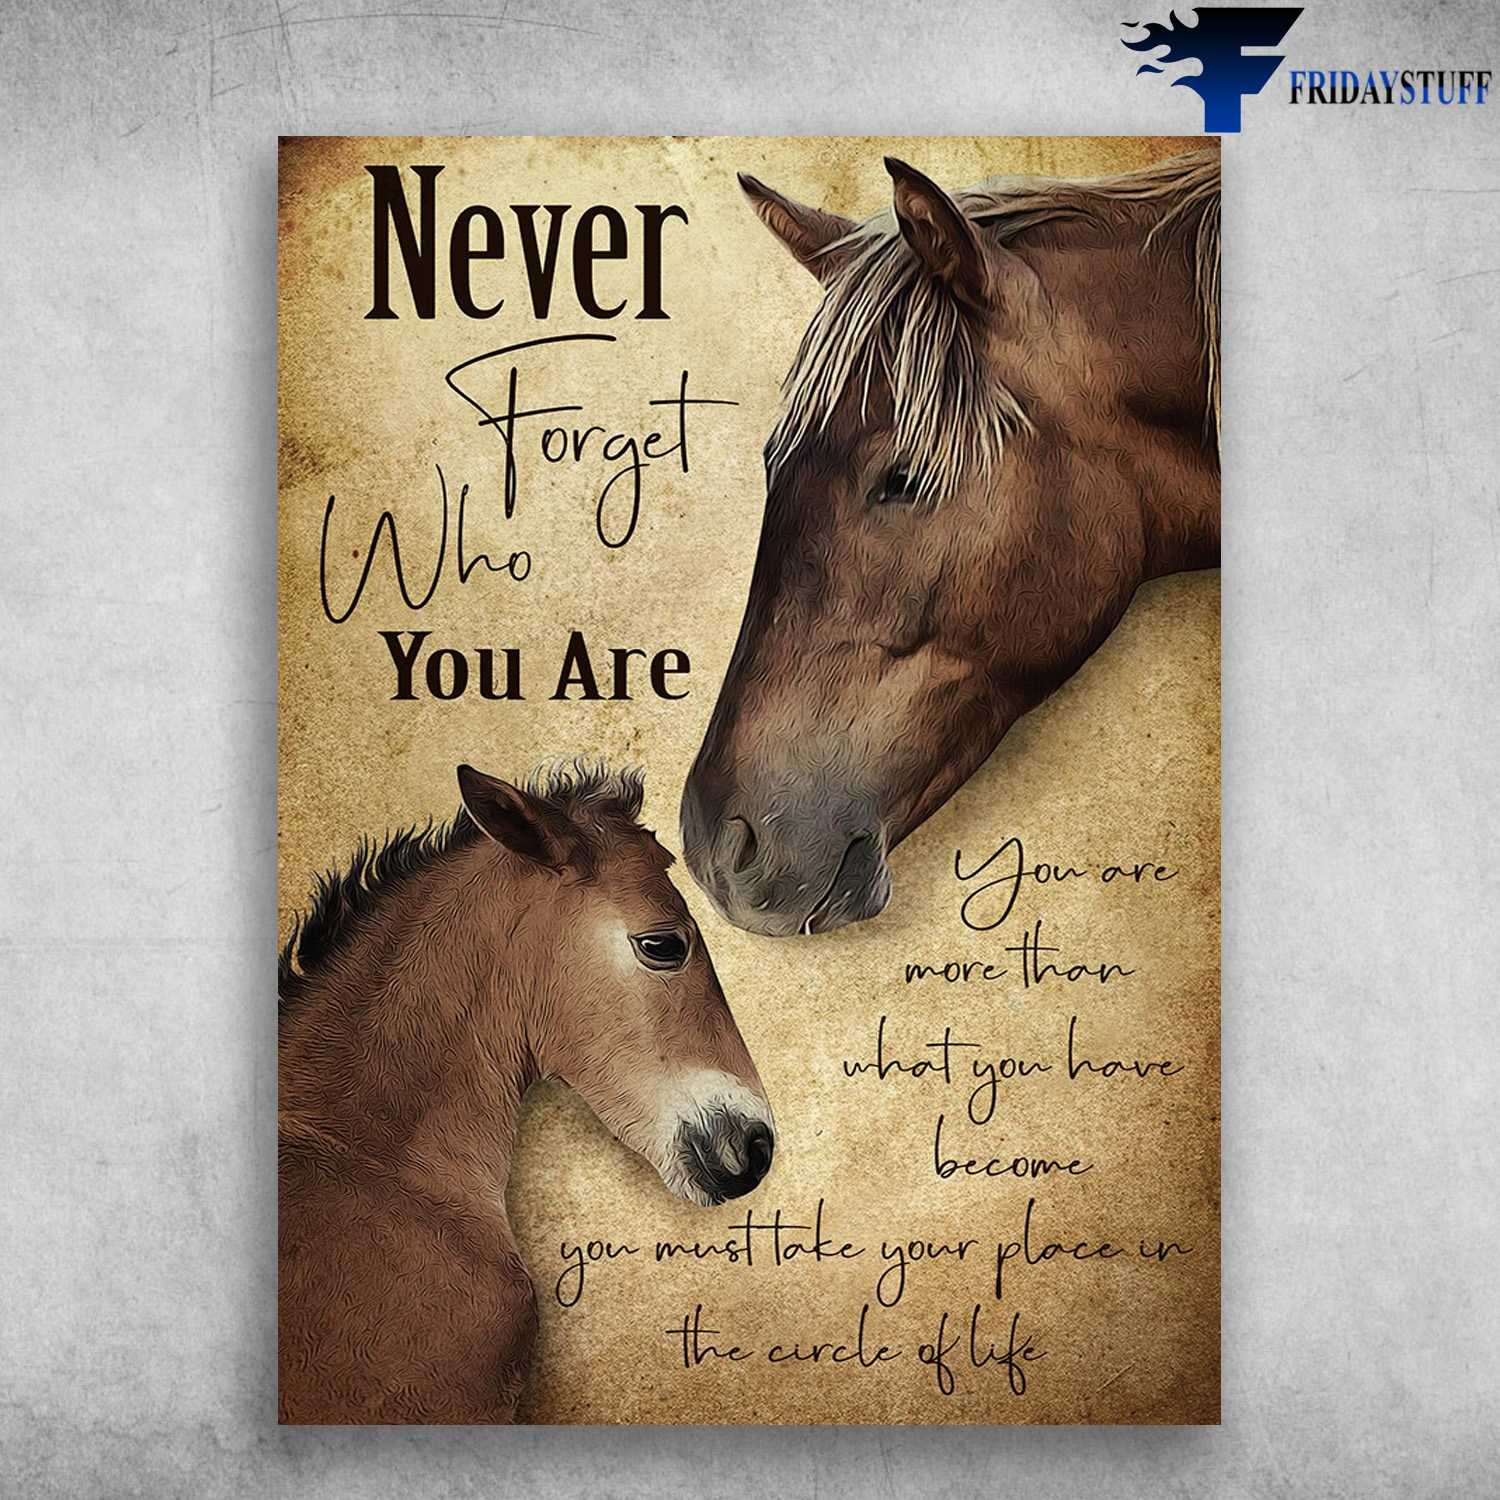 Parent And Child, Horse Poster - Never Forget Who You Are, You Are More Than What You Have, Become You Must Take Your Place, In The Circle Of Life